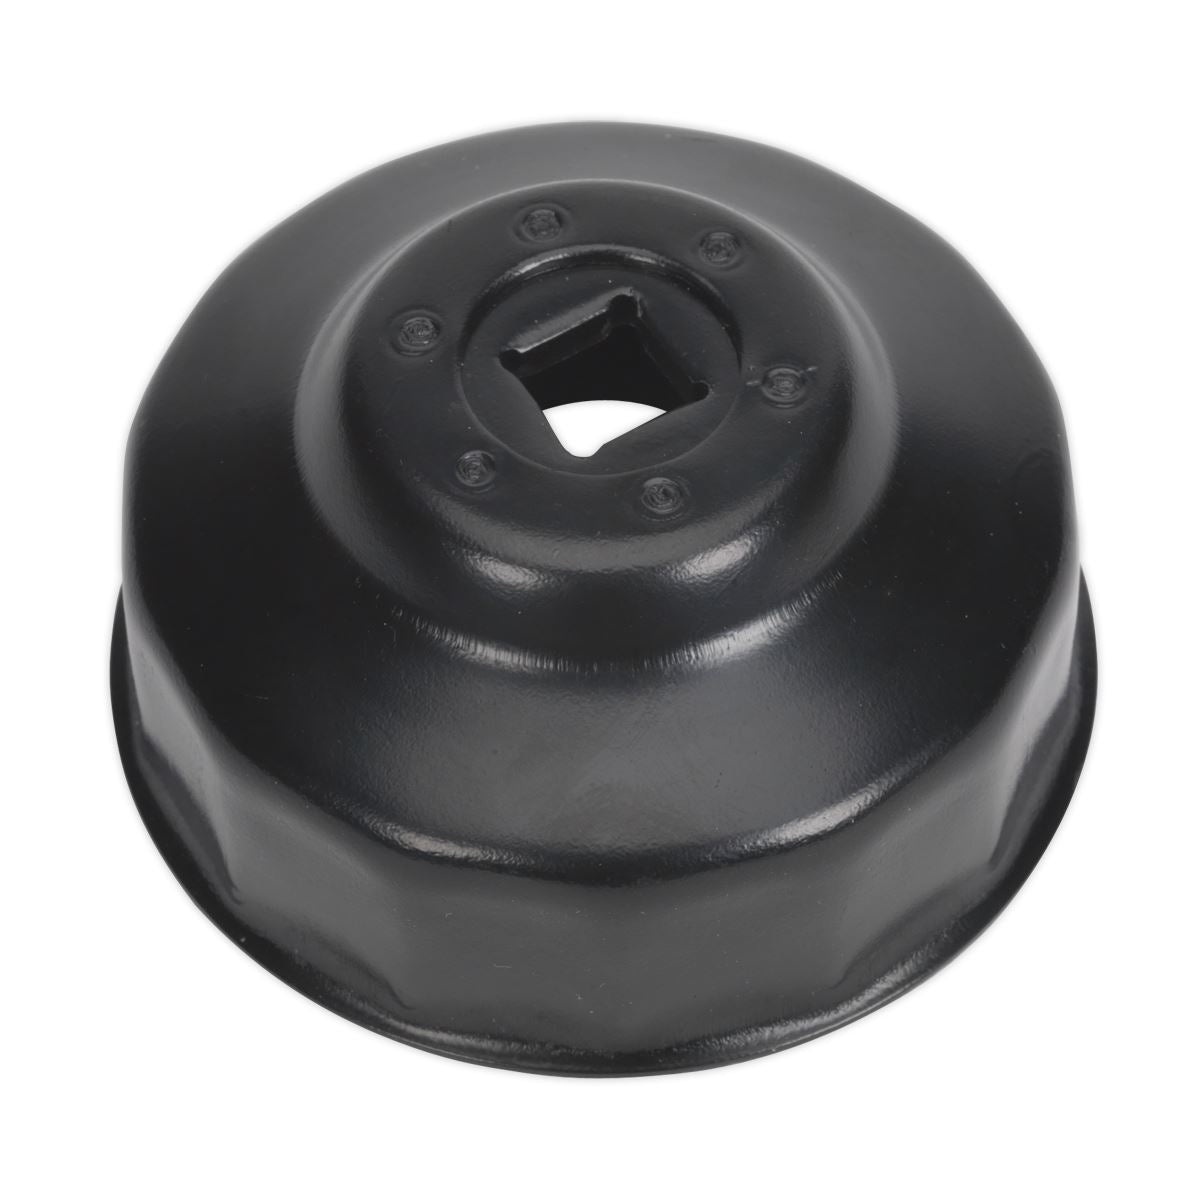 Sealey Oil Filter Cap Wrench Ø65mm x 14 Flutes